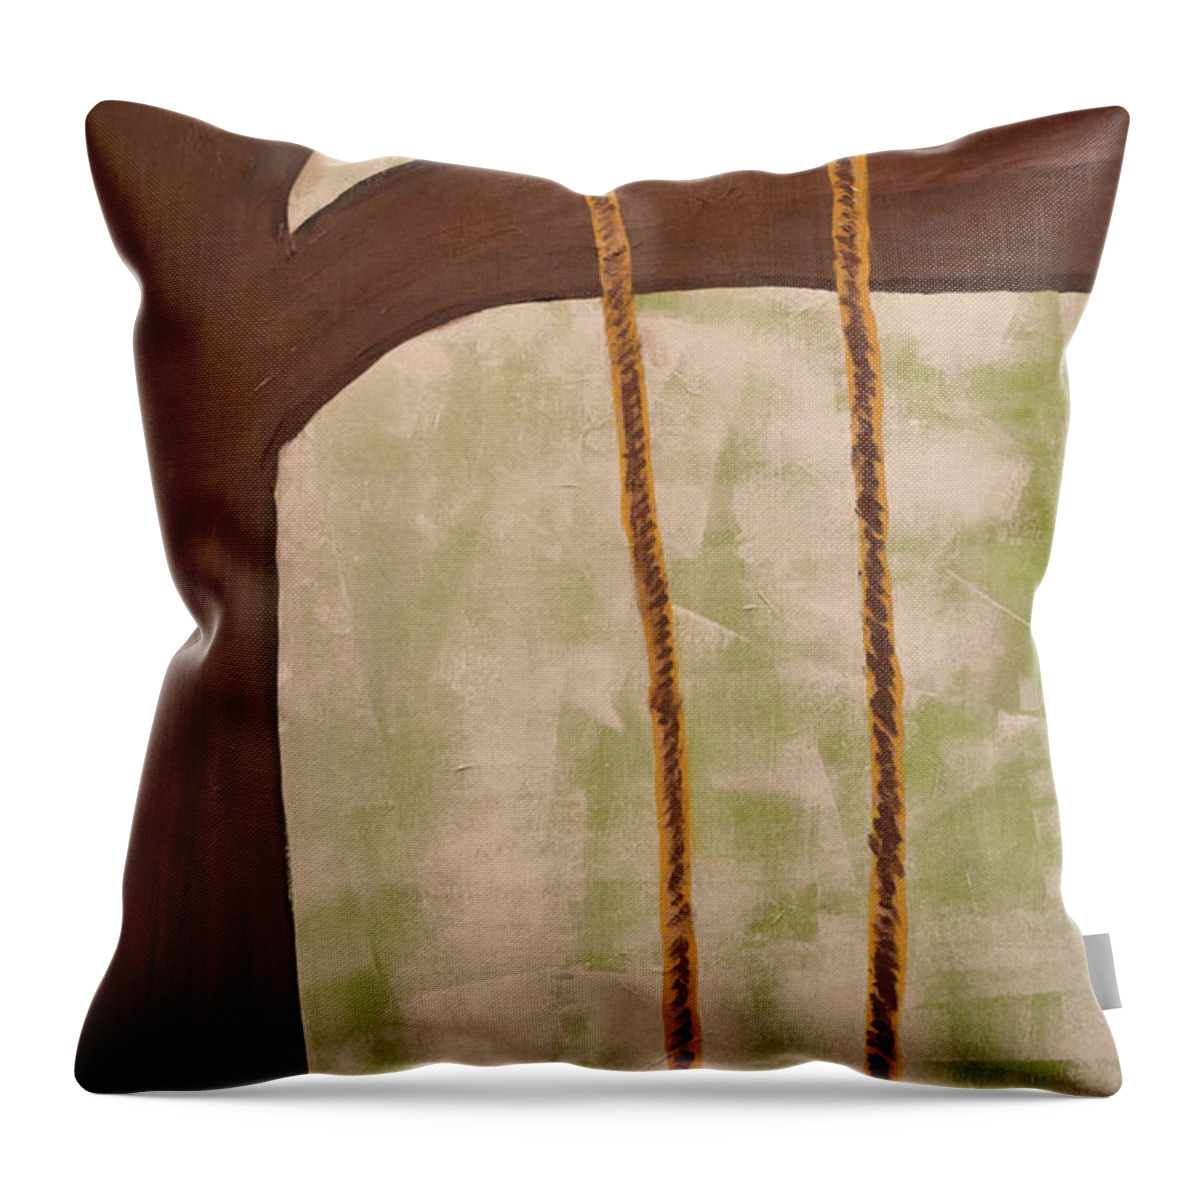 Tree Throw Pillow featuring the photograph The Tree Swing by Roberta Byram